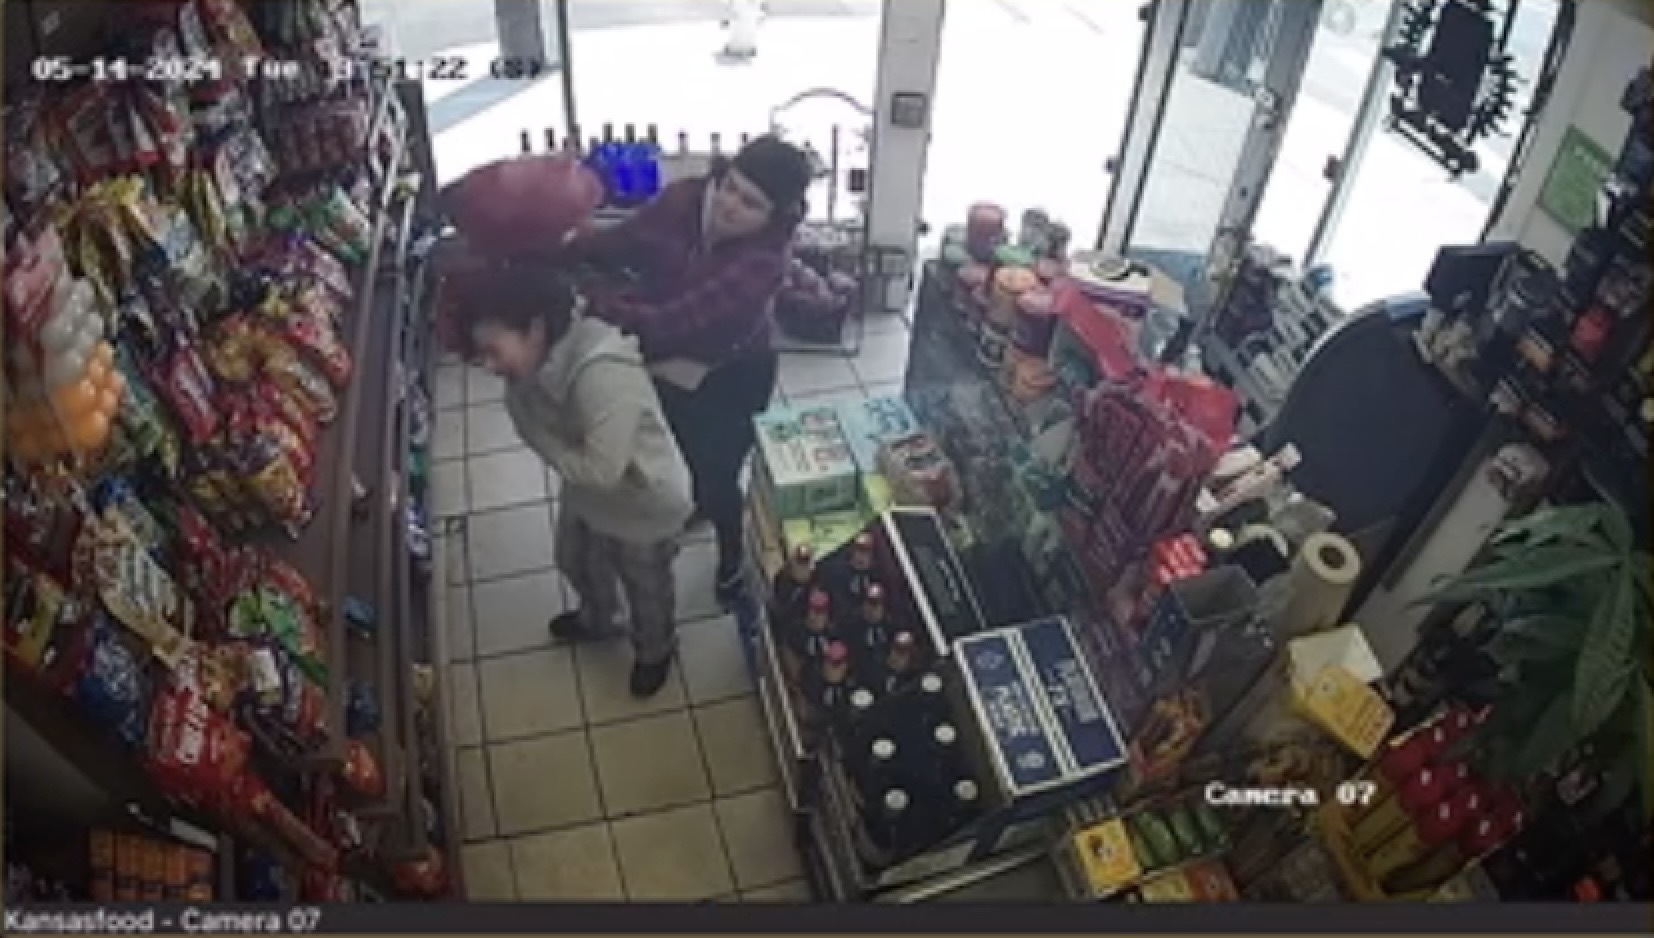 A still from surveillance video shows a woman being attacked by another woman inside a store.